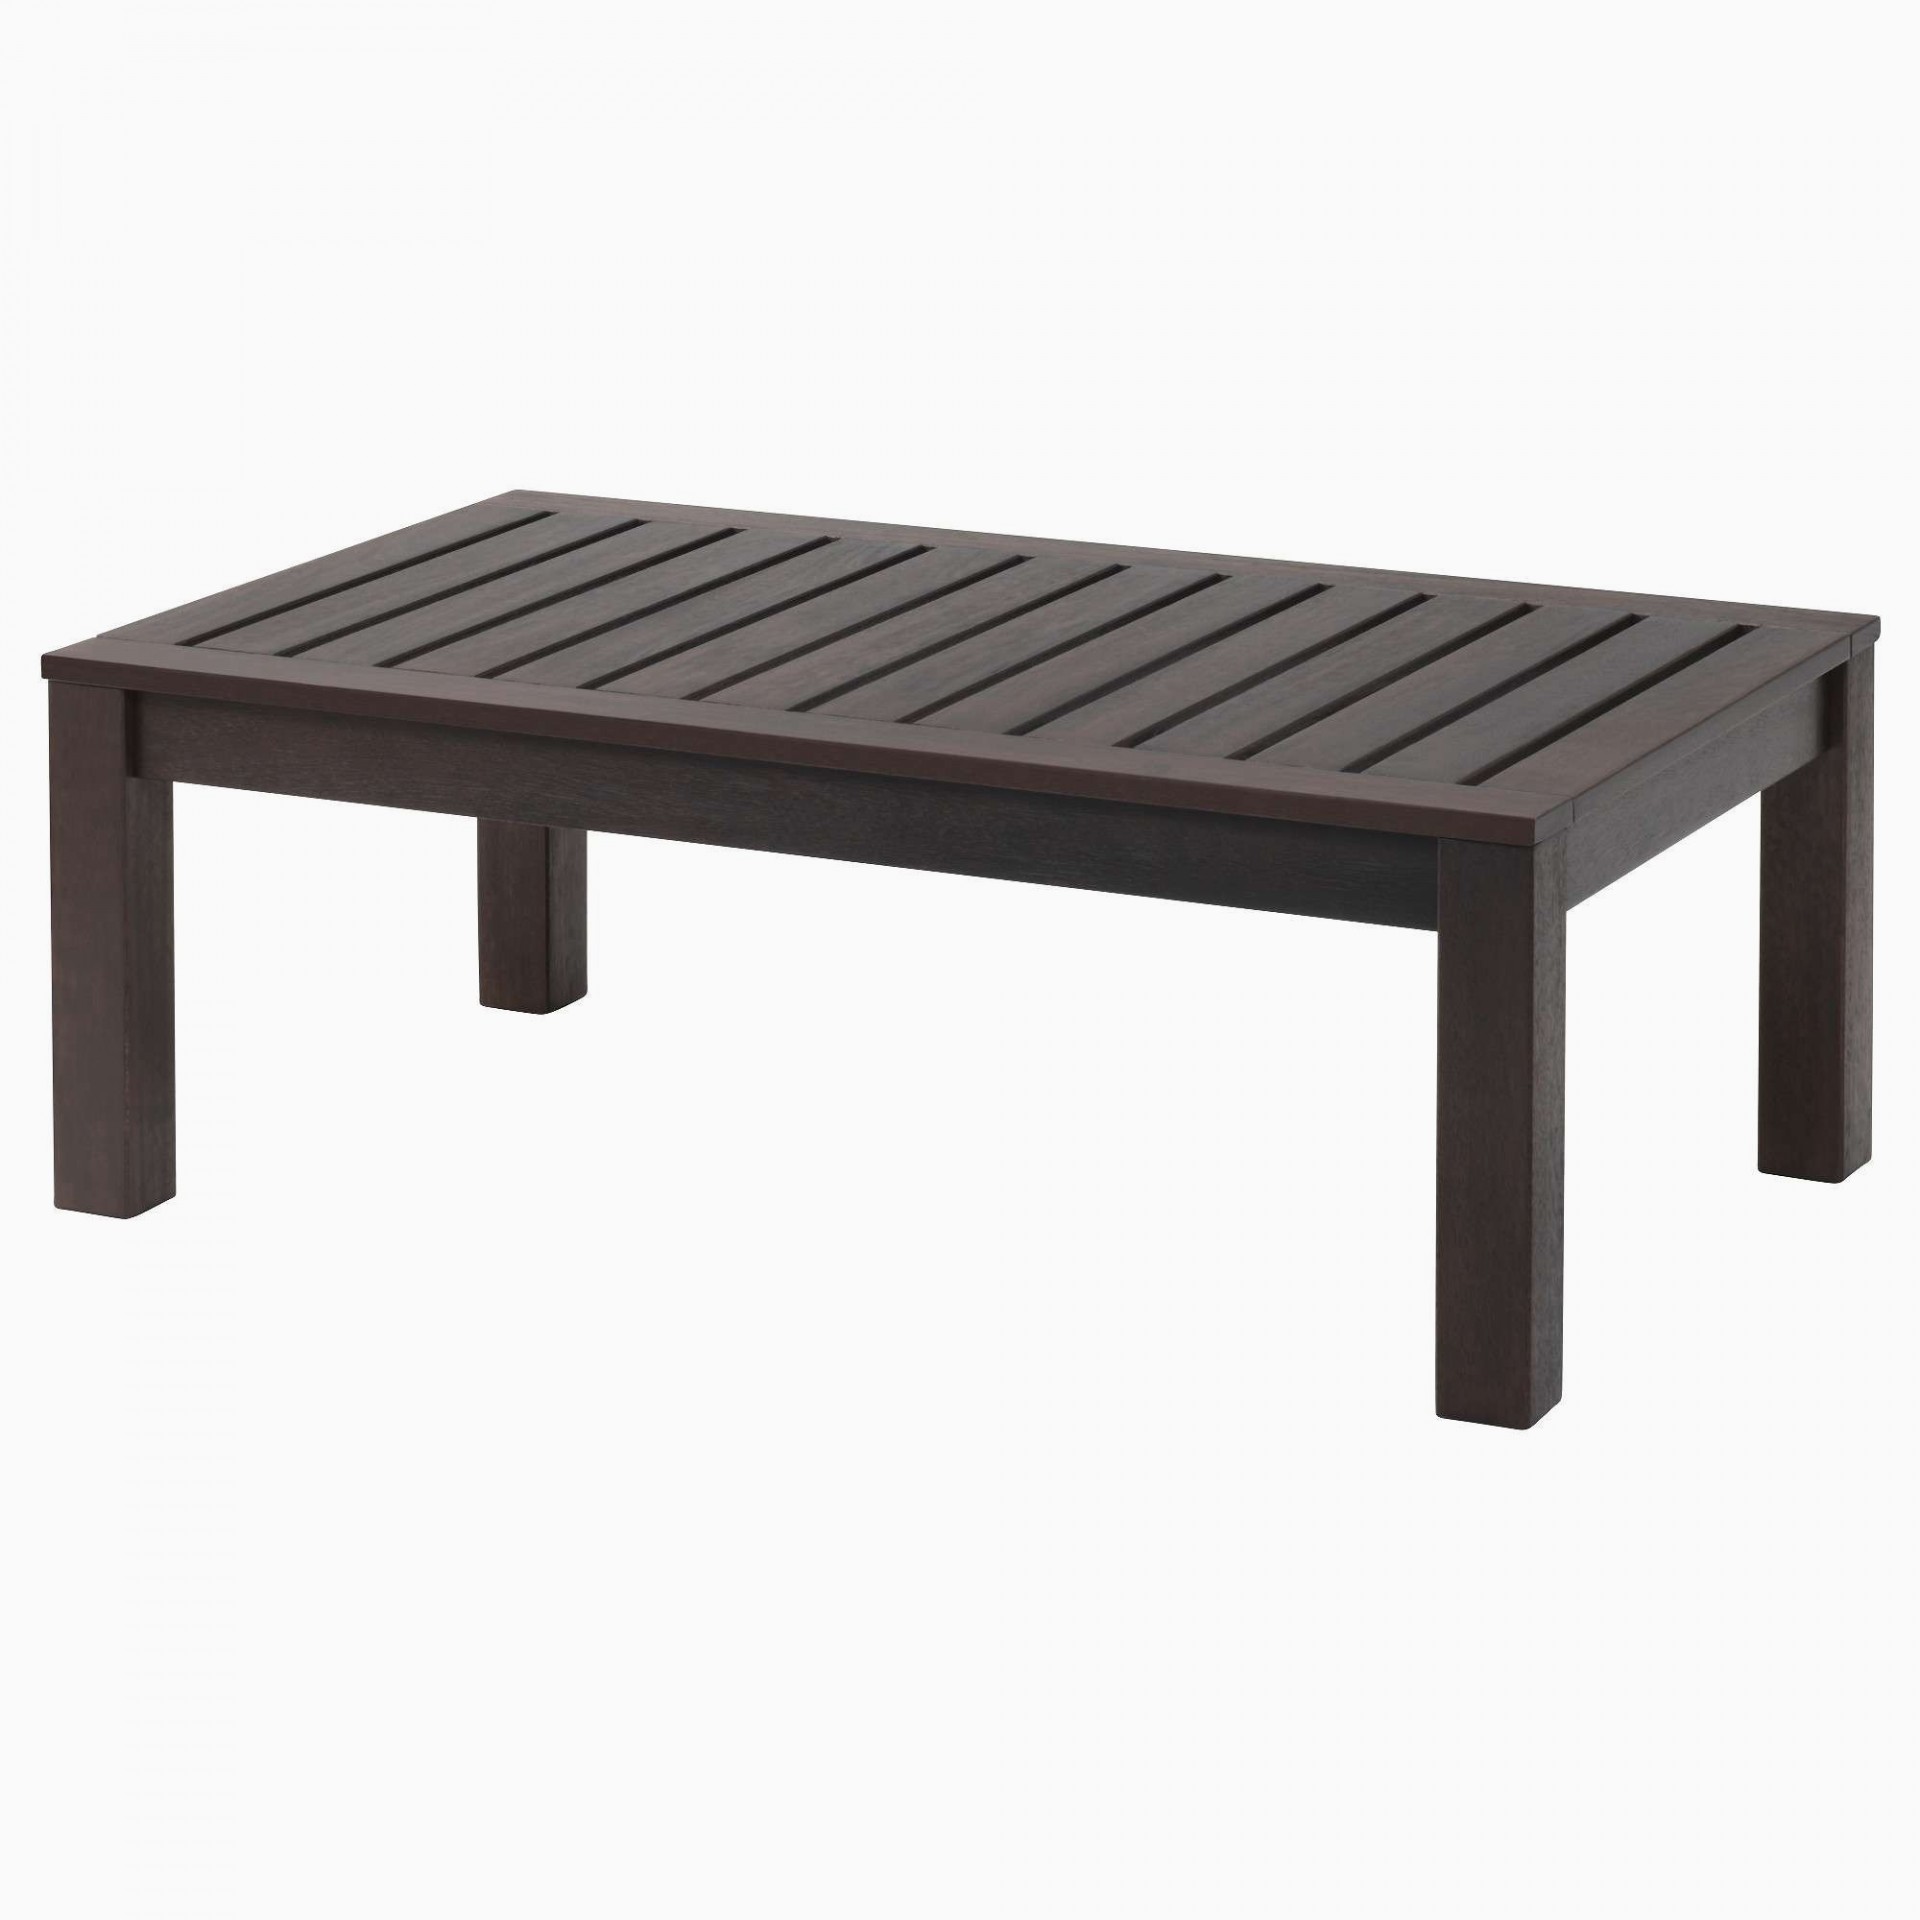 unique tema slate coffee table tables awesome valuable outdoor with umbrella hole stampler side small kloven ikea deck ideas concept wrought iron bathtub pier one dining chairs